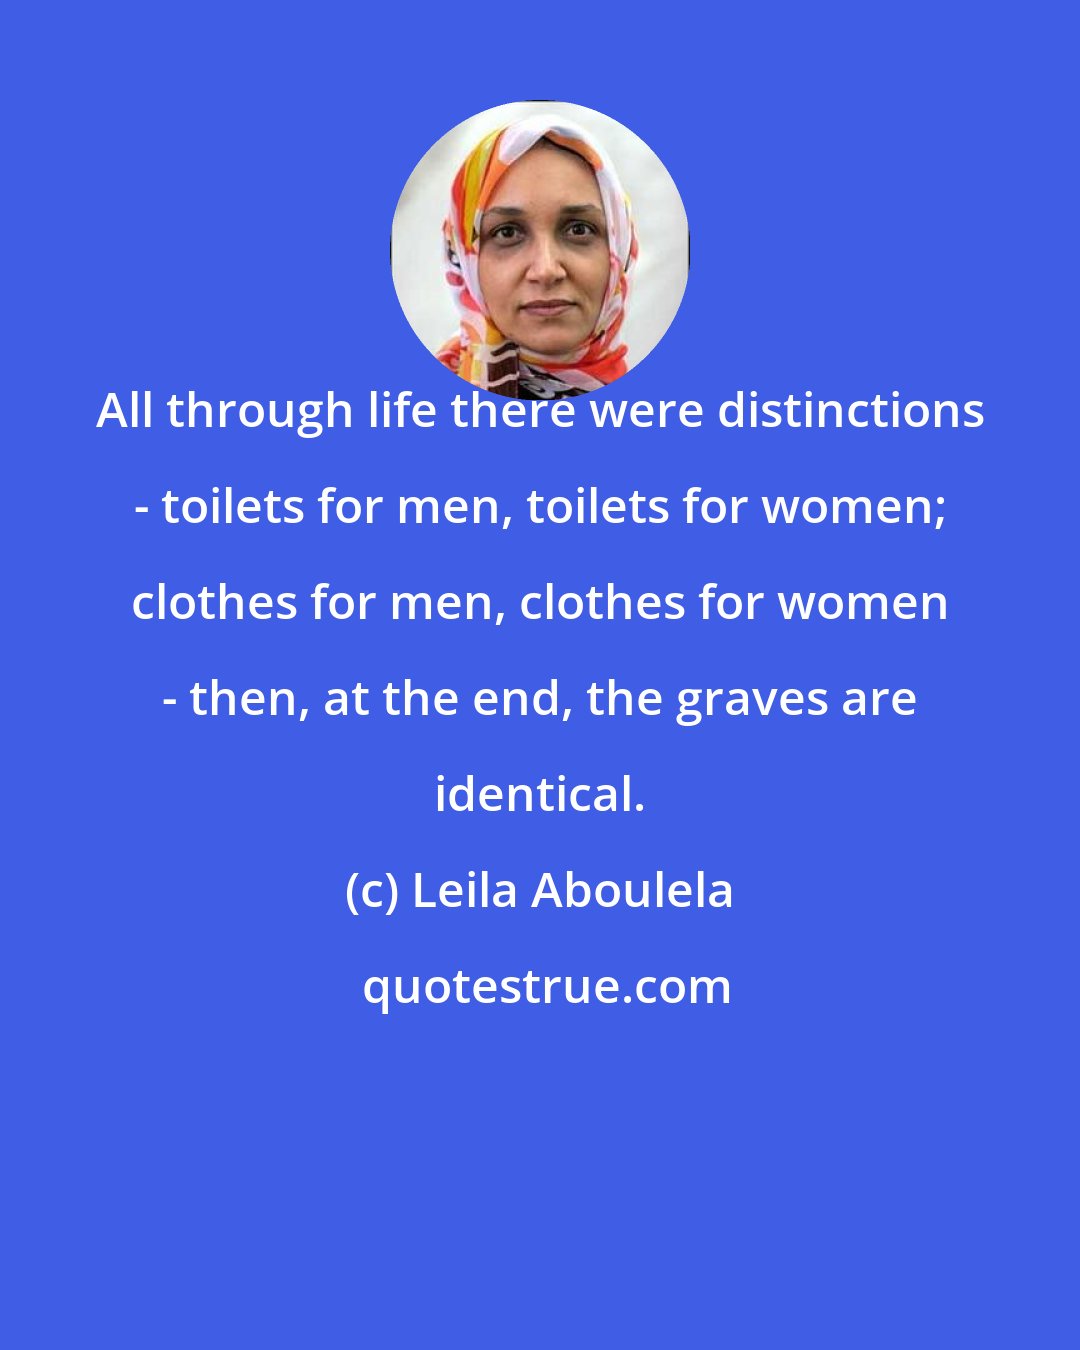 Leila Aboulela: All through life there were distinctions - toilets for men, toilets for women; clothes for men, clothes for women - then, at the end, the graves are identical.